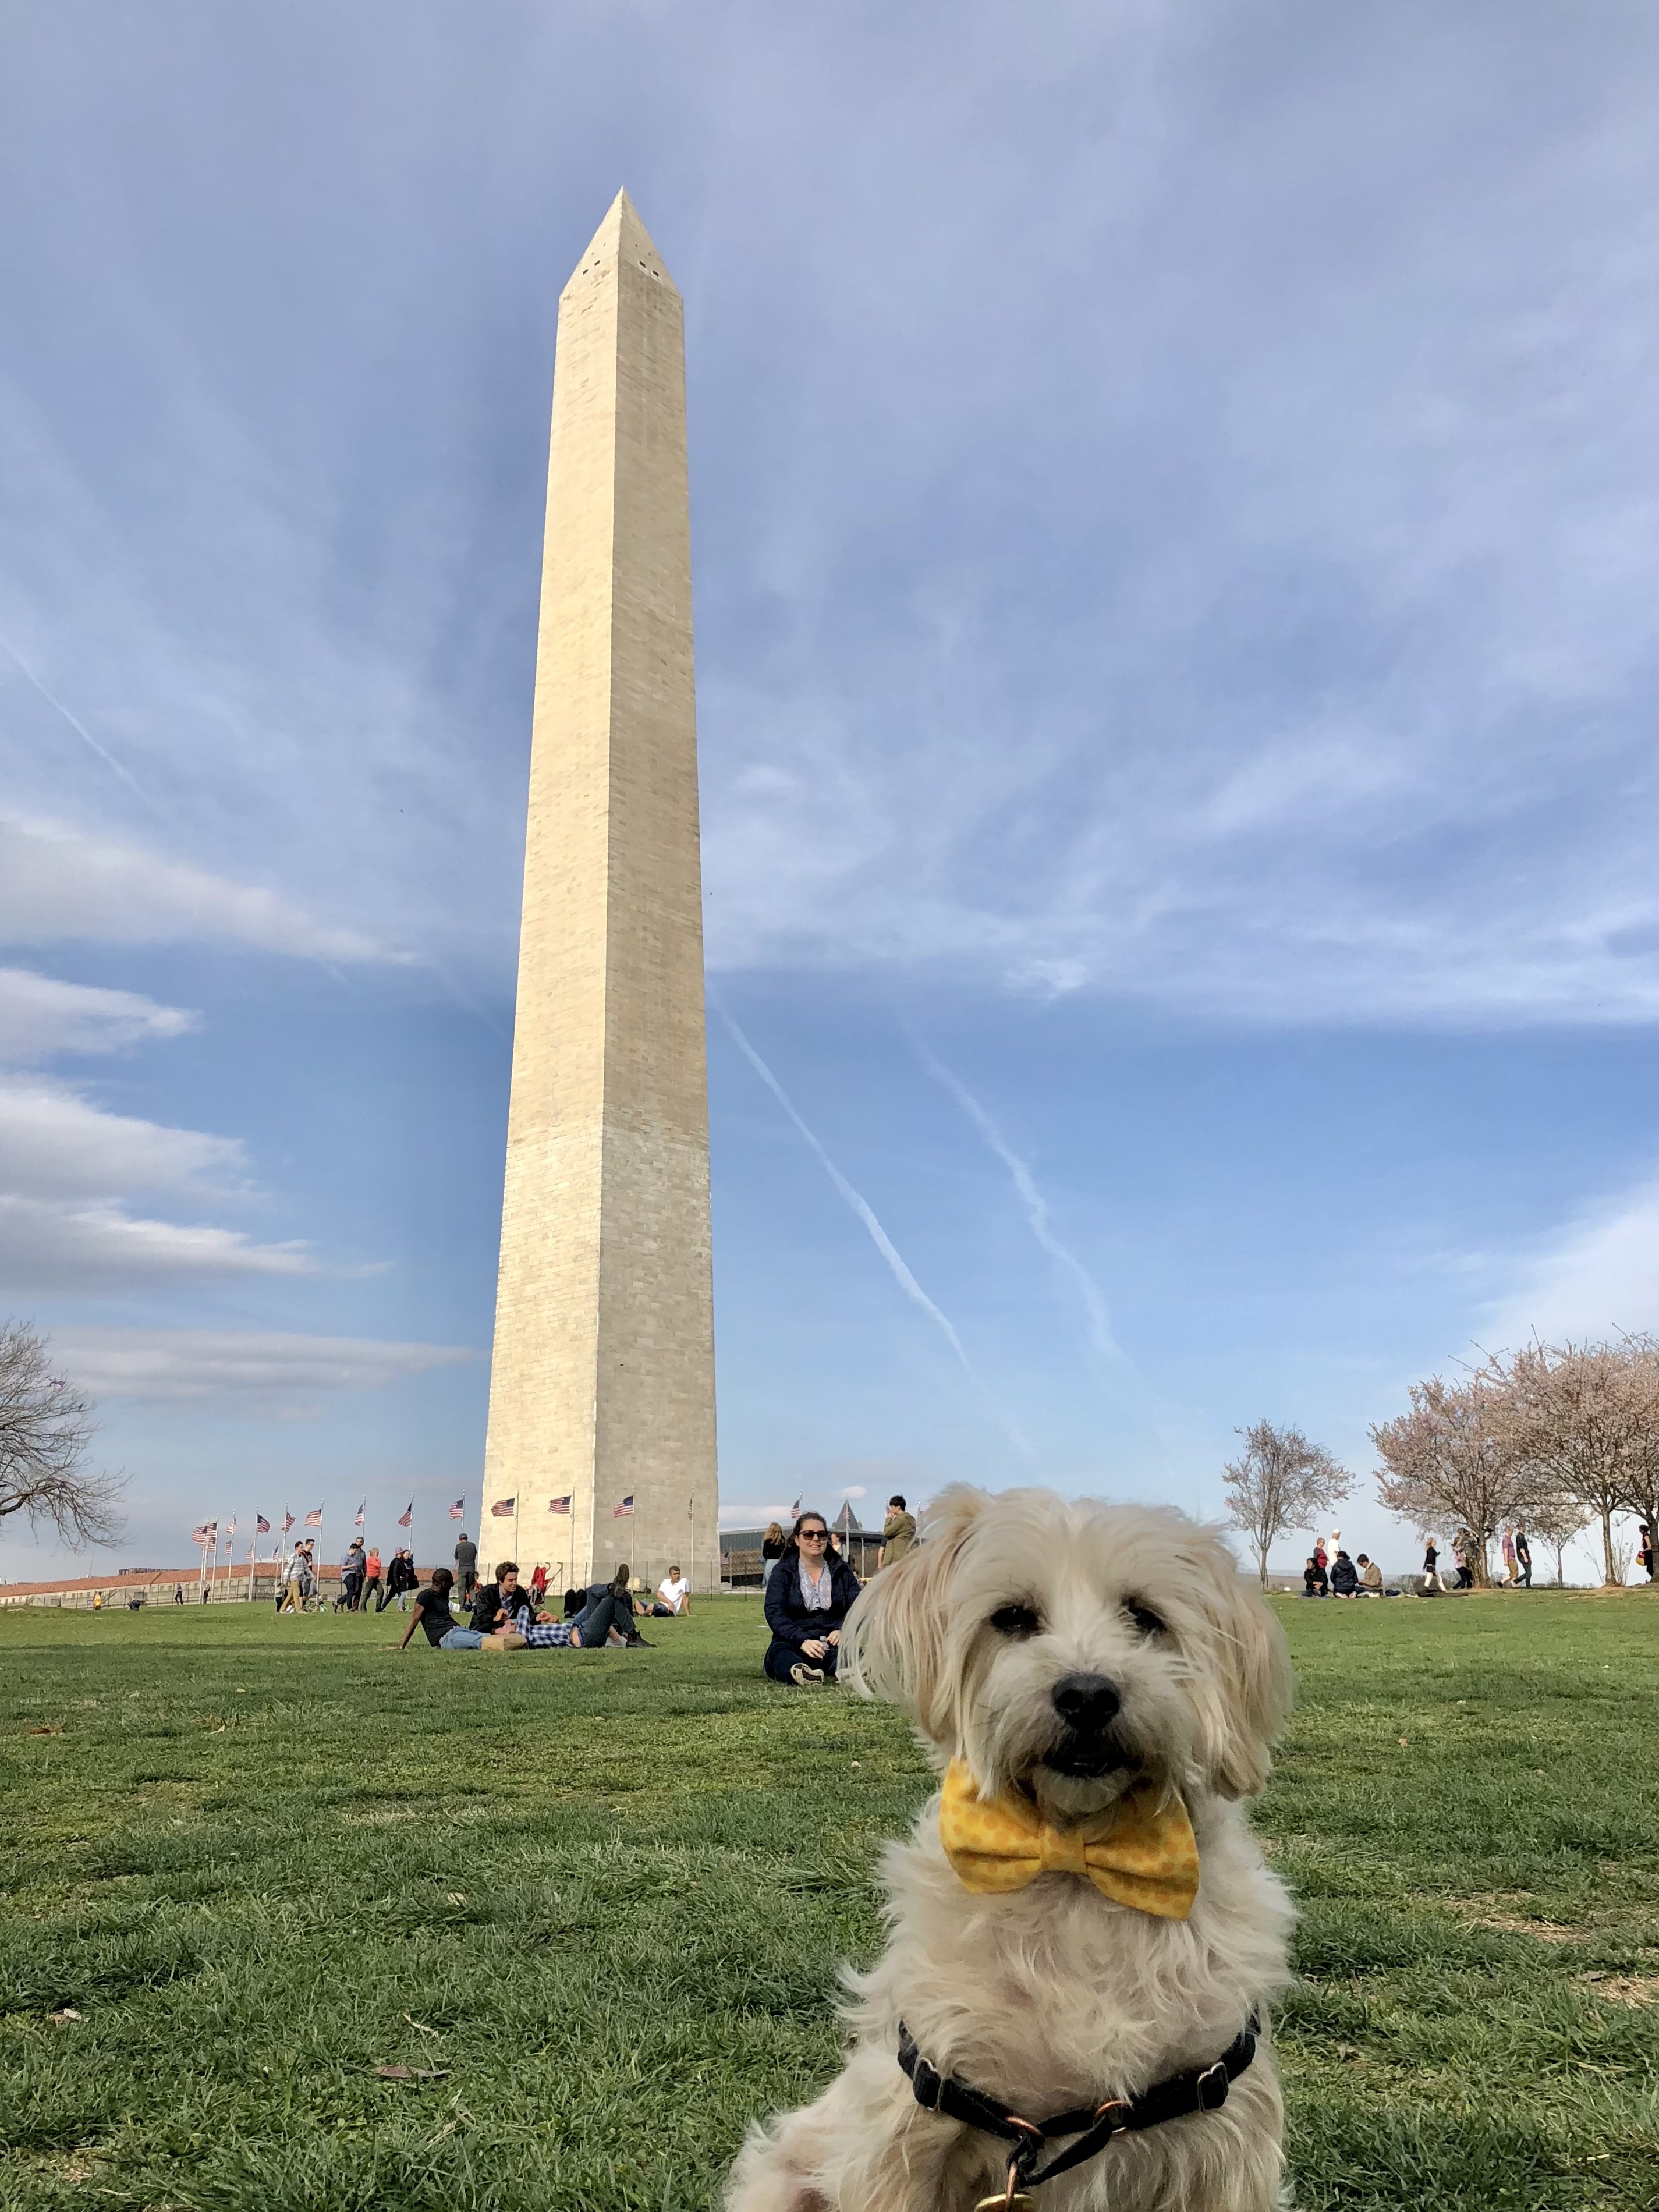 A dog is standing in front of the Washington National Monument on the National Mall.